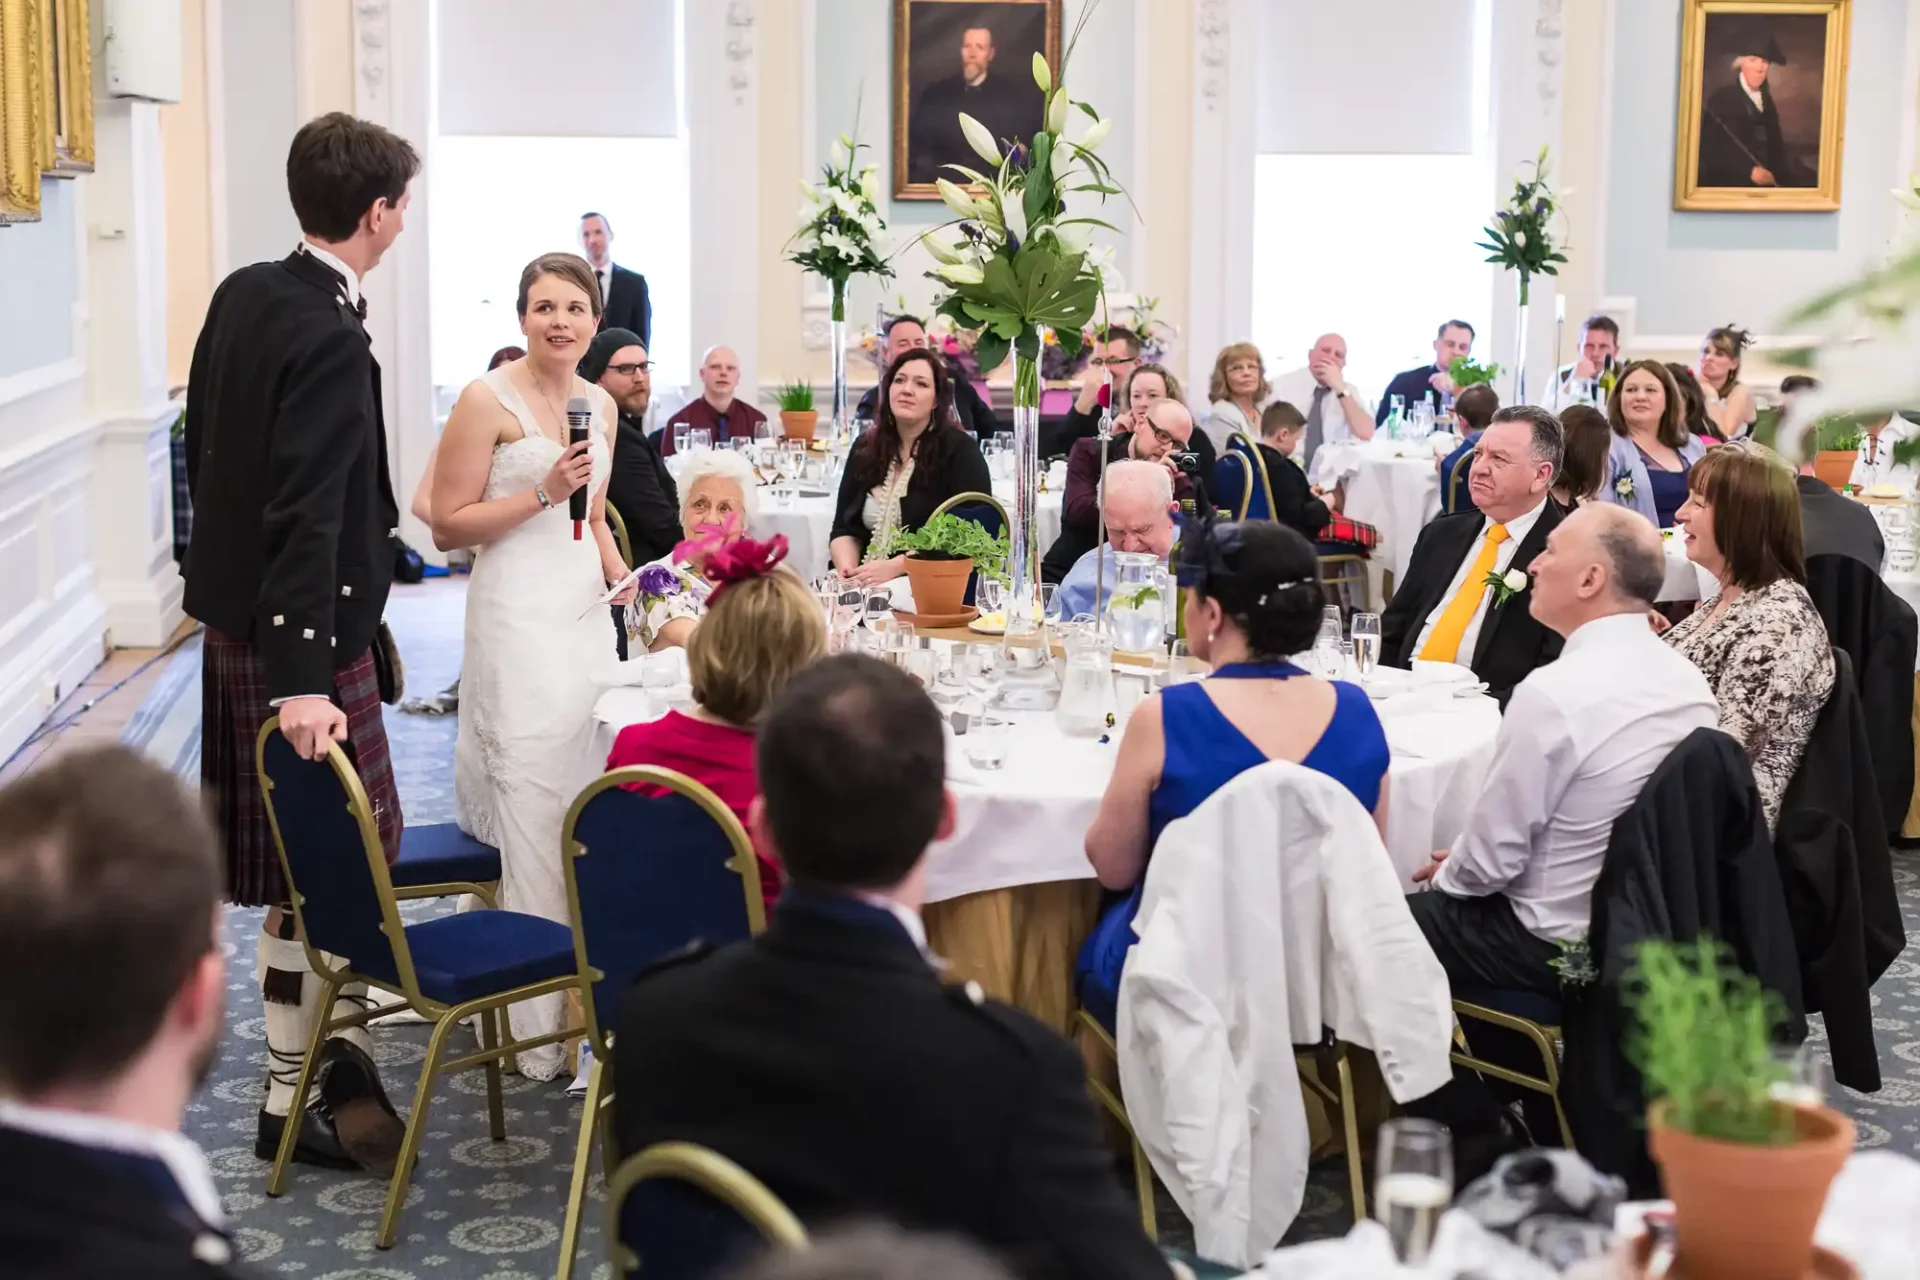 A bride and groom stand at their wedding reception, engaging with seated guests in an elegant dining hall.